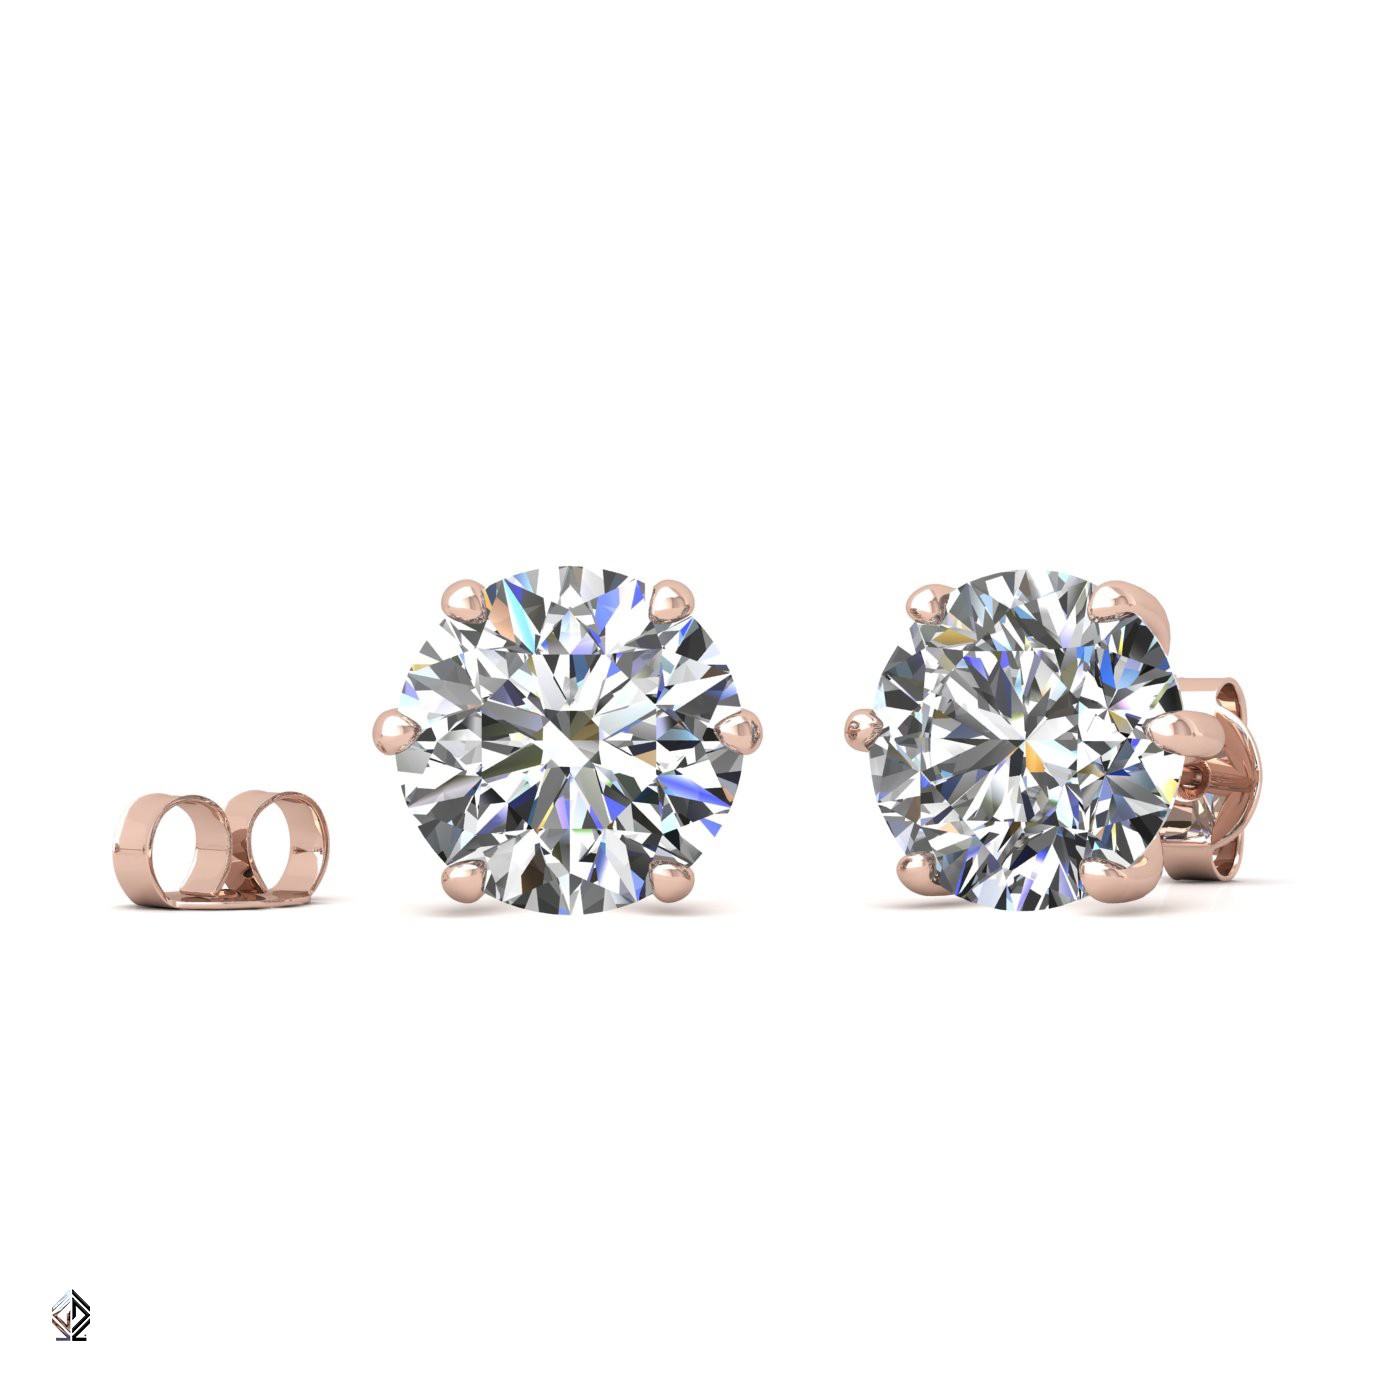 18k rose gold 0,3 ct each (0,6 tcw) 6 prongs round shape diamond earrings Photos & images